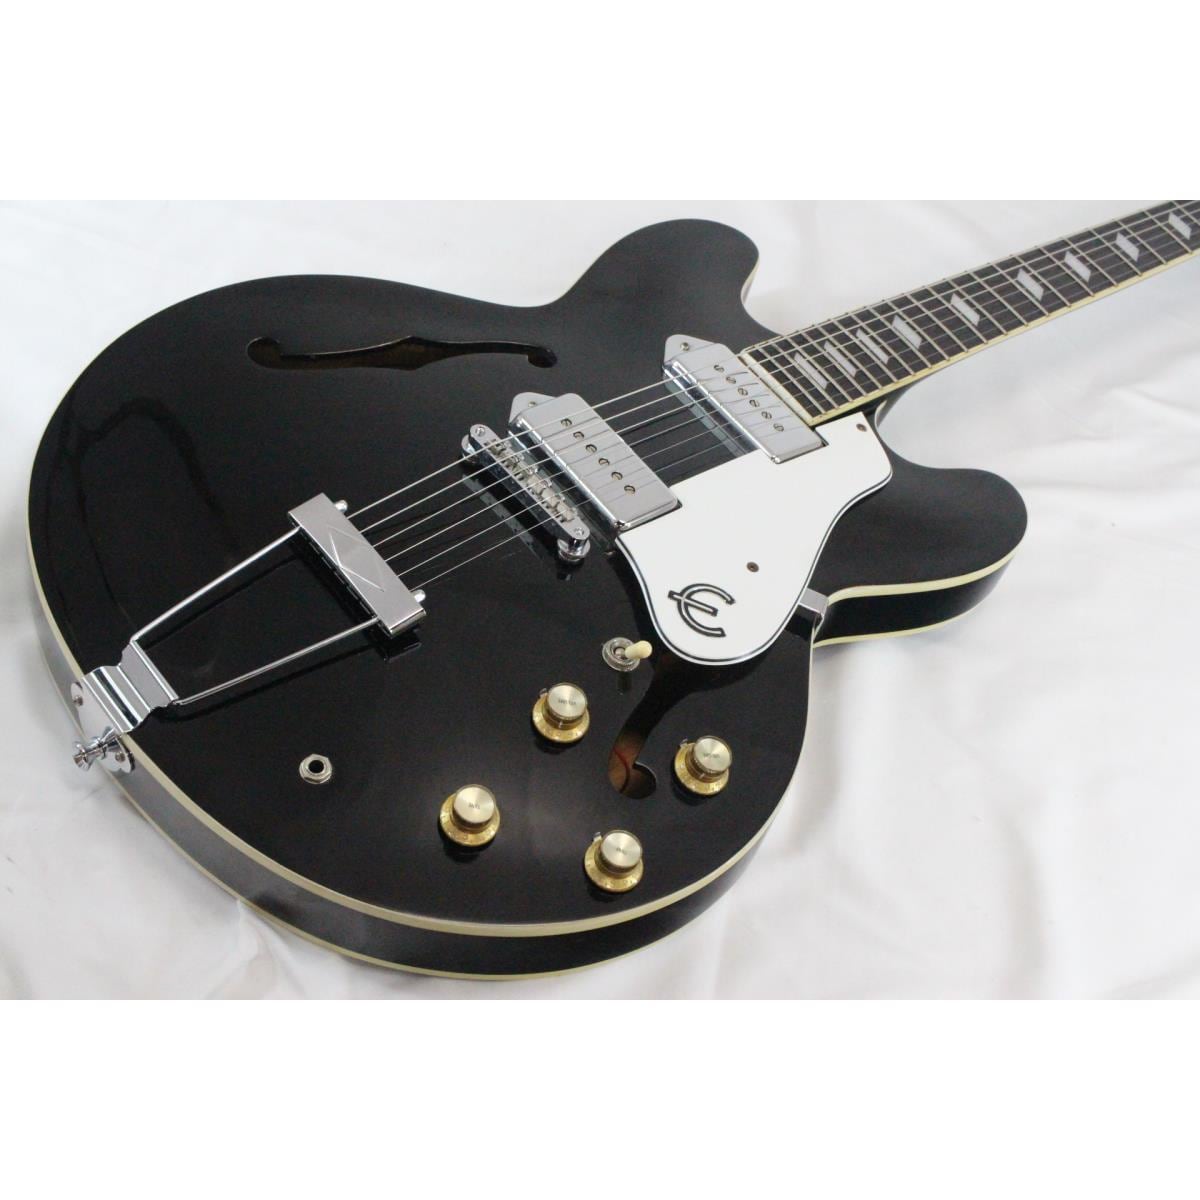 Epiphone Casino Made in 1999 by Peerless